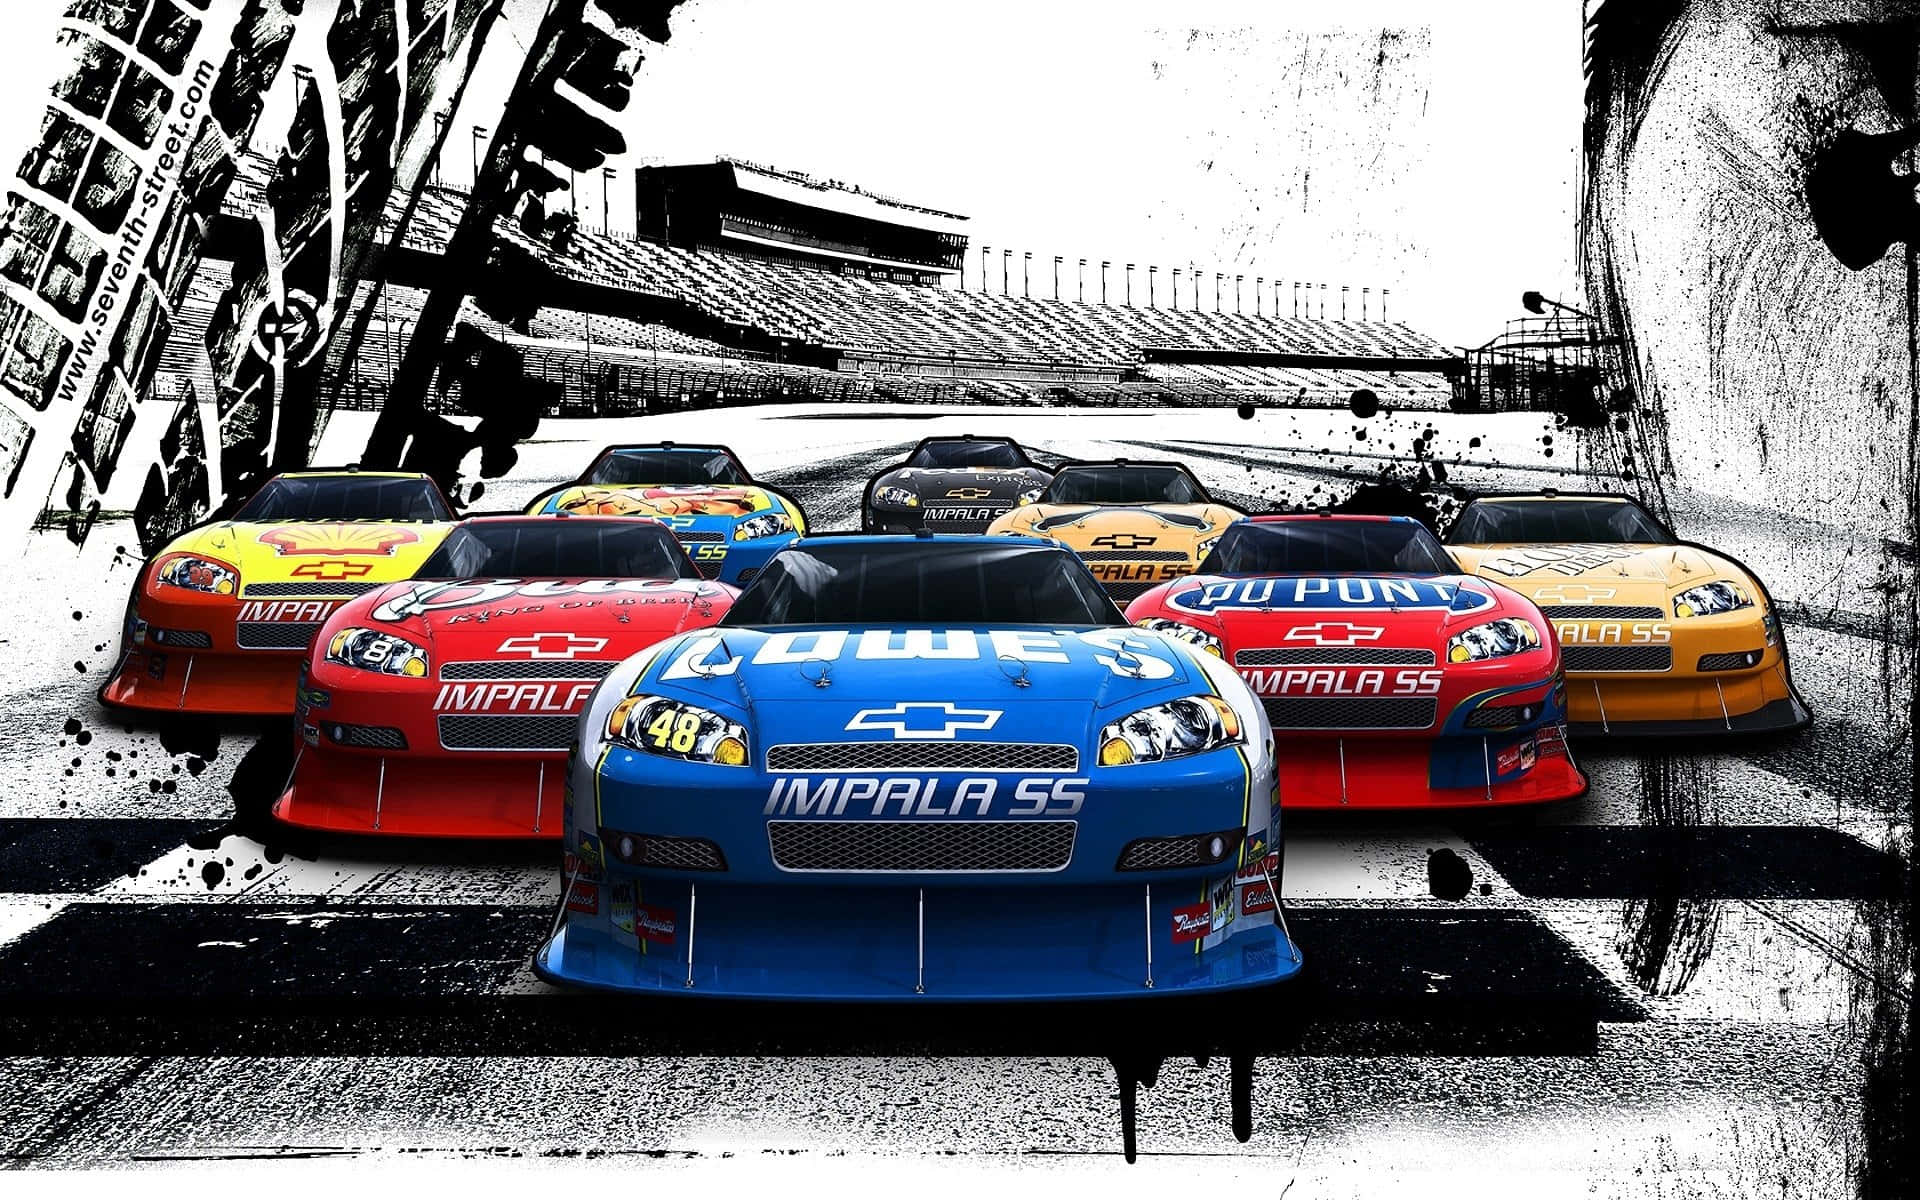 Thrills and Speed - Intense NASCAR Race Moment Wallpaper